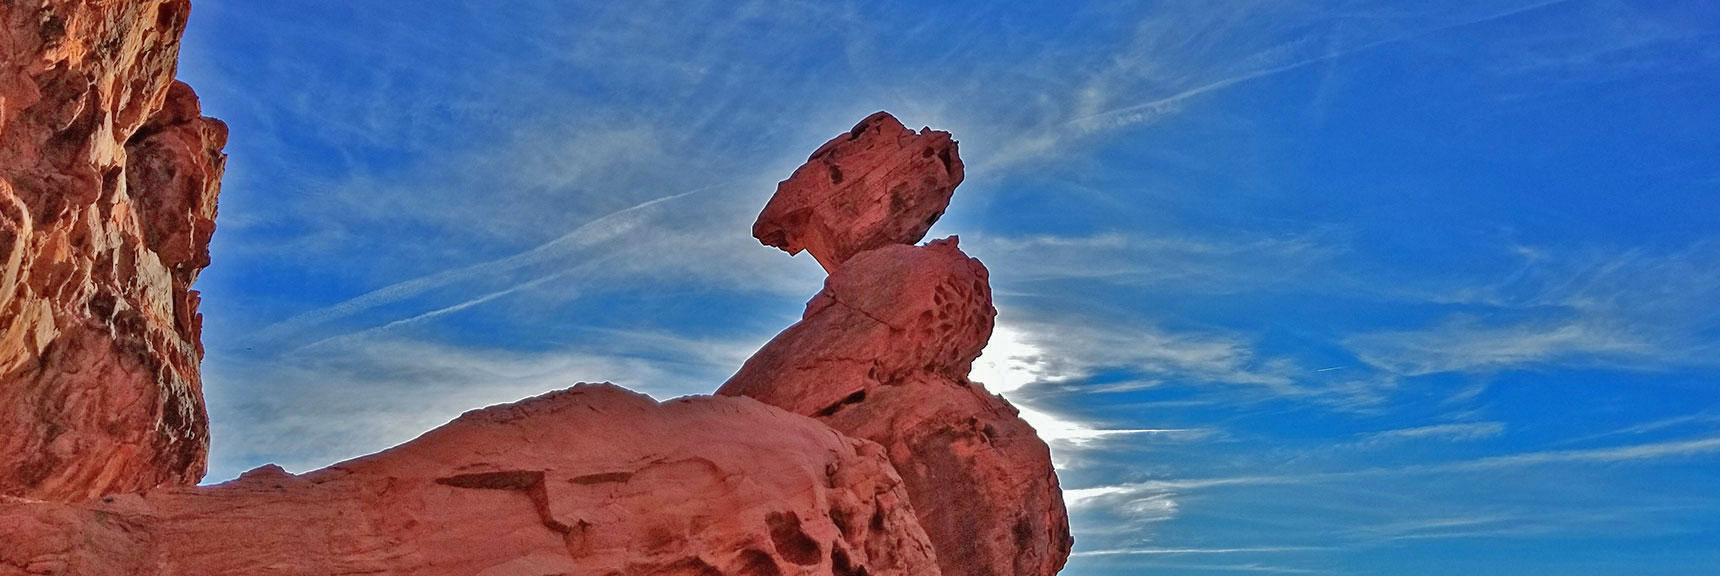 Balancing Rock | Valley of Fire State Park, Nevada